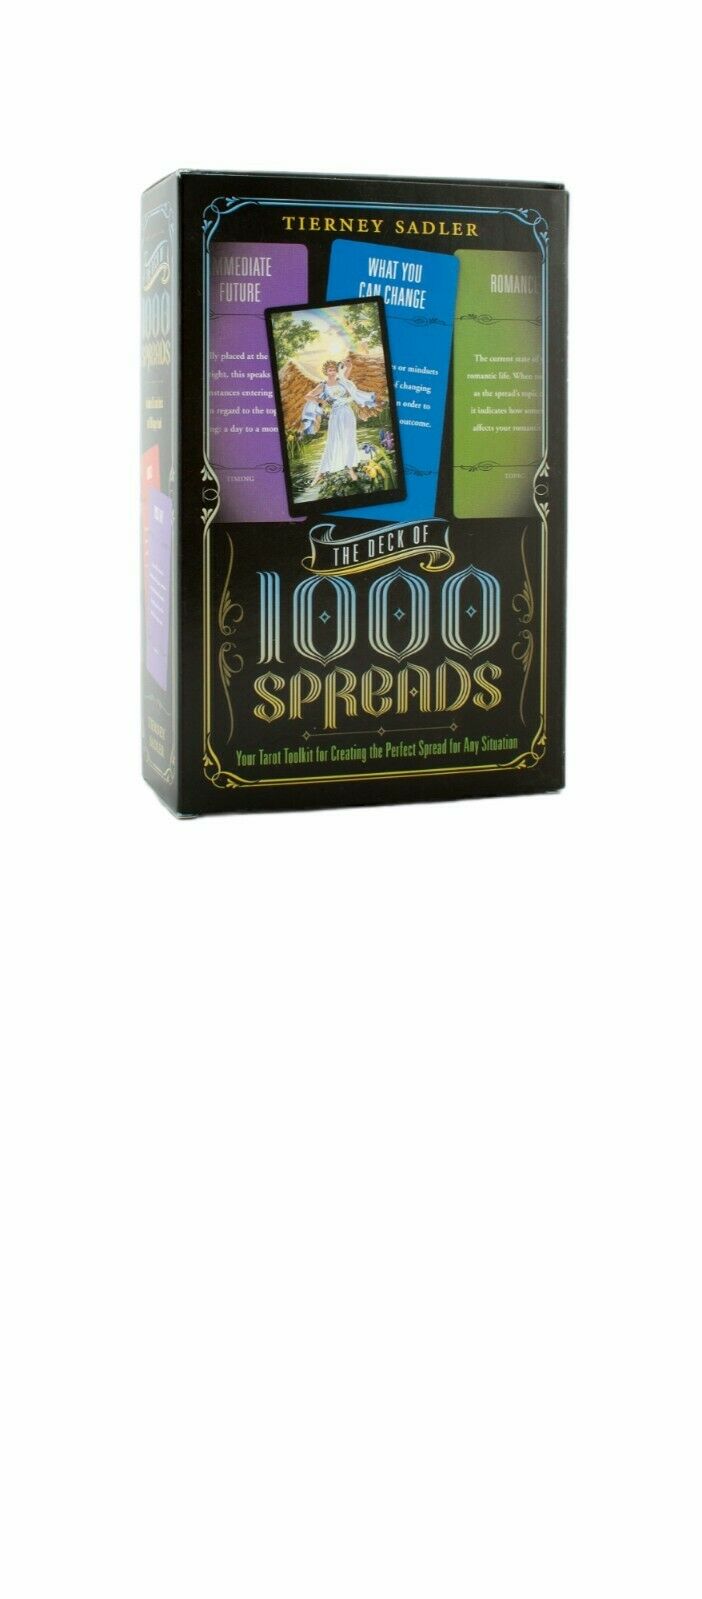 The Deck Of 1000 Spreads - Oop - Tarot Toolkit For Creating Perfect Spreads